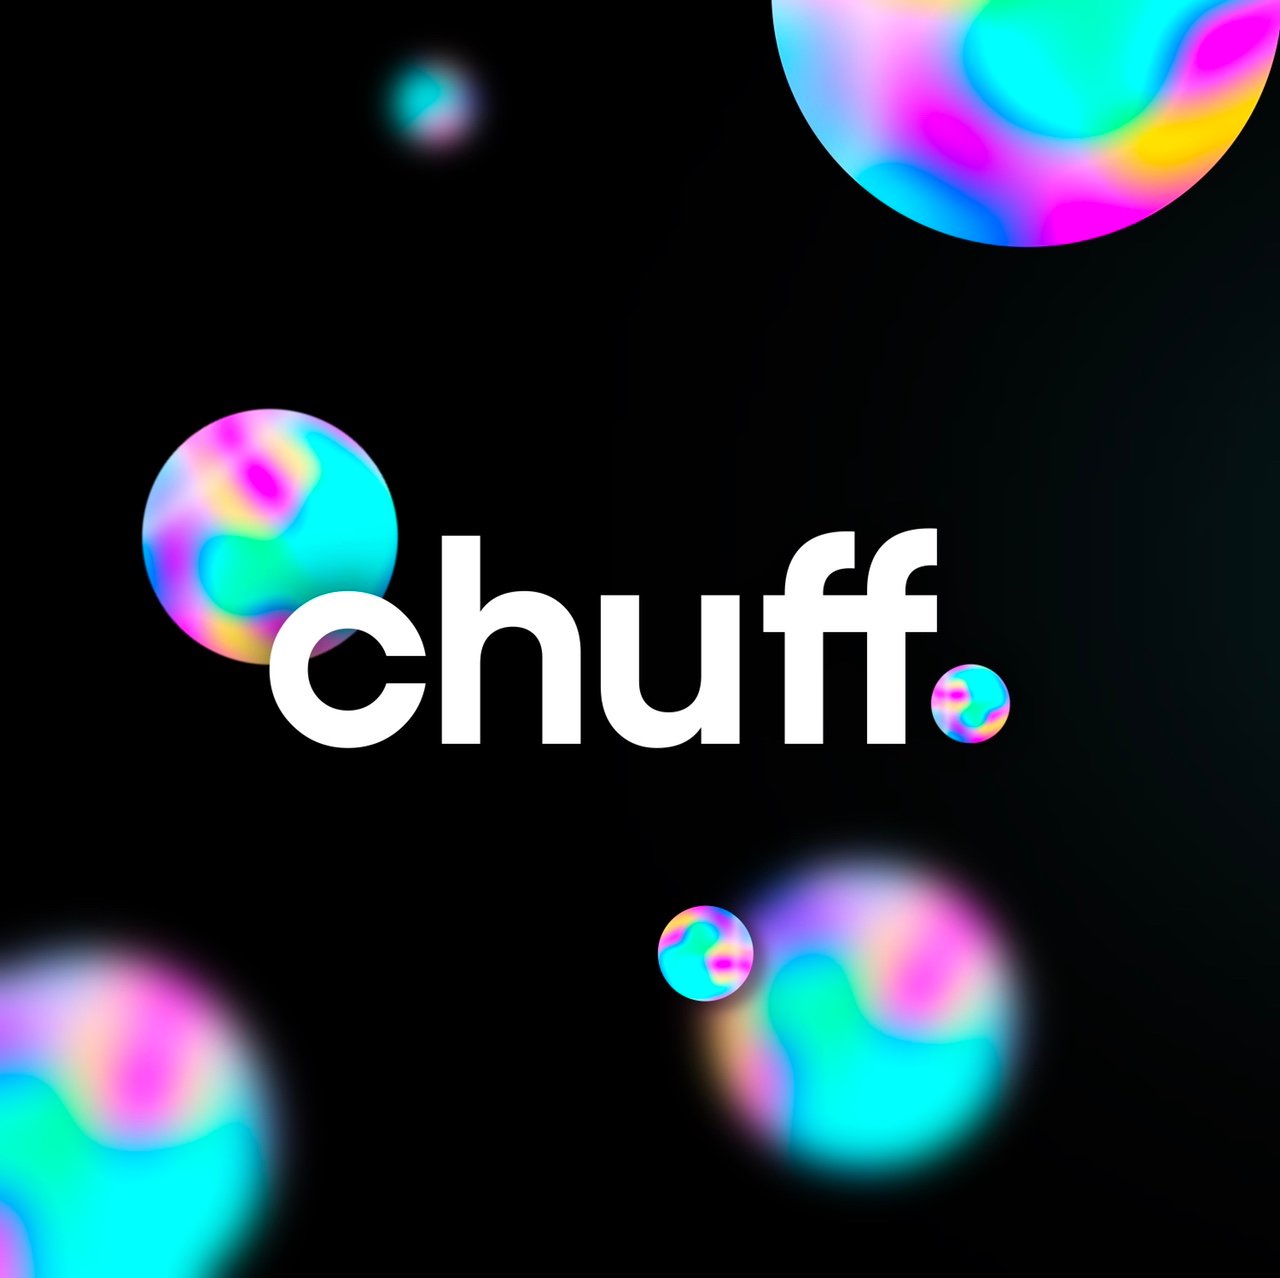 Official twitter for the chuff gang.Come join our discord and learn CRYPTO for free 💵💸💰💰